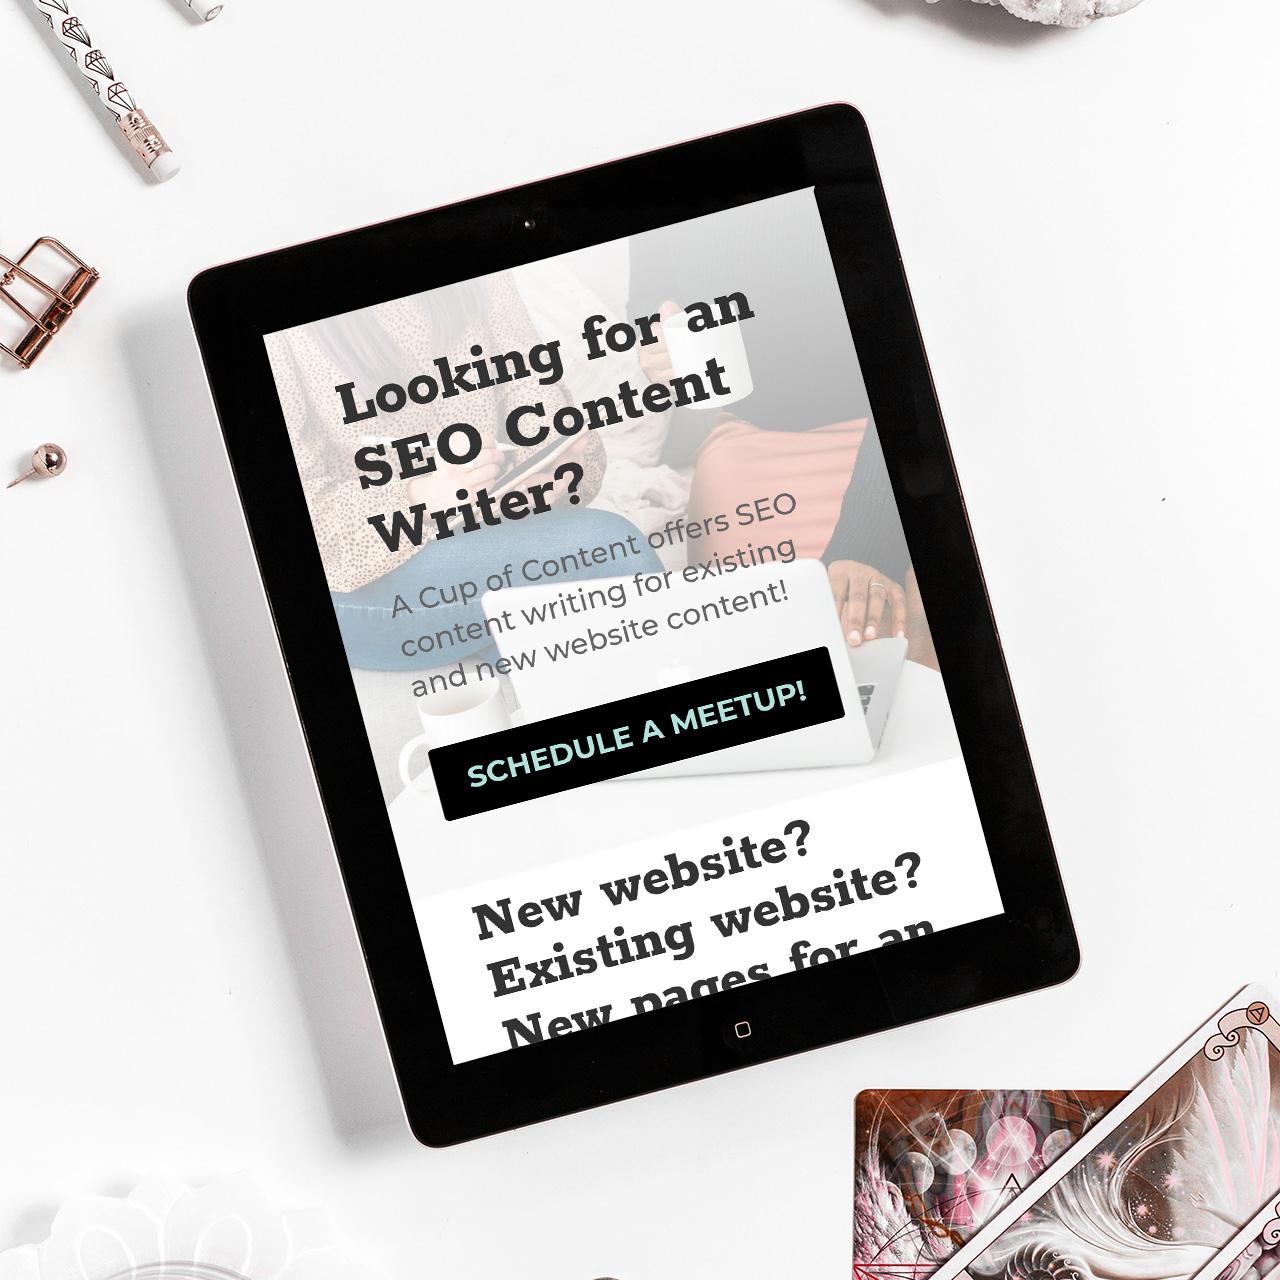 smart tablet on a white table with paperclips surrounding it showing seo content writing editing services by a cup of content